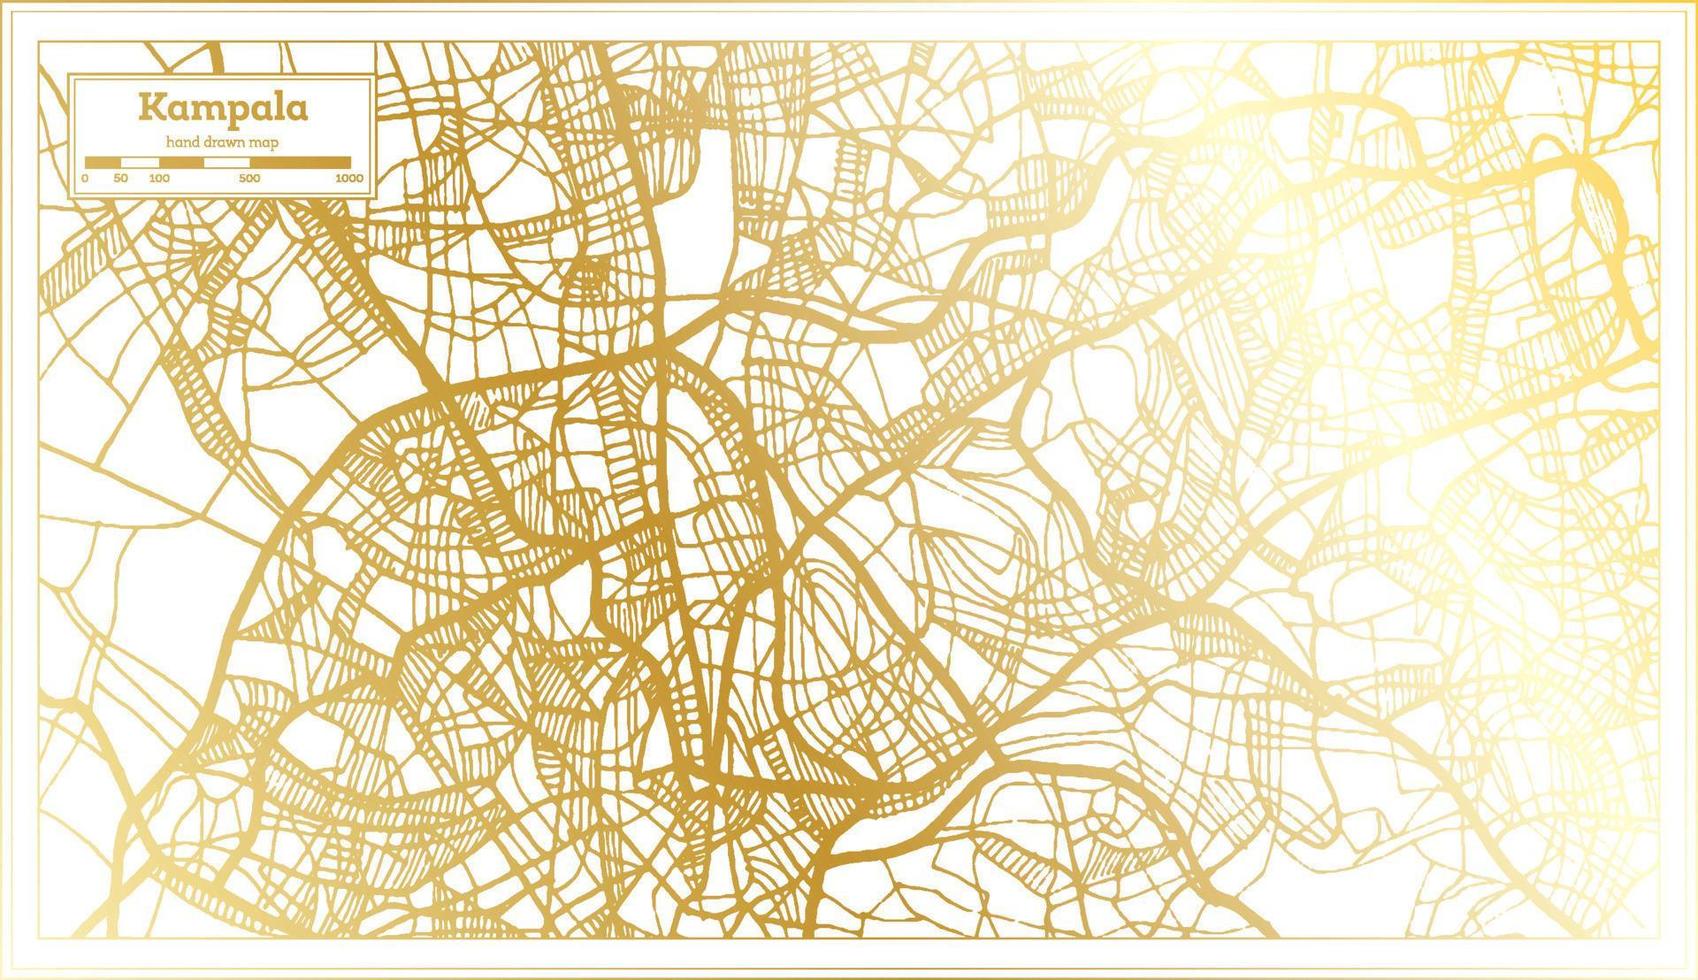 Kampala Uganda City Map in Retro Style in Golden Color. Outline Map. vector